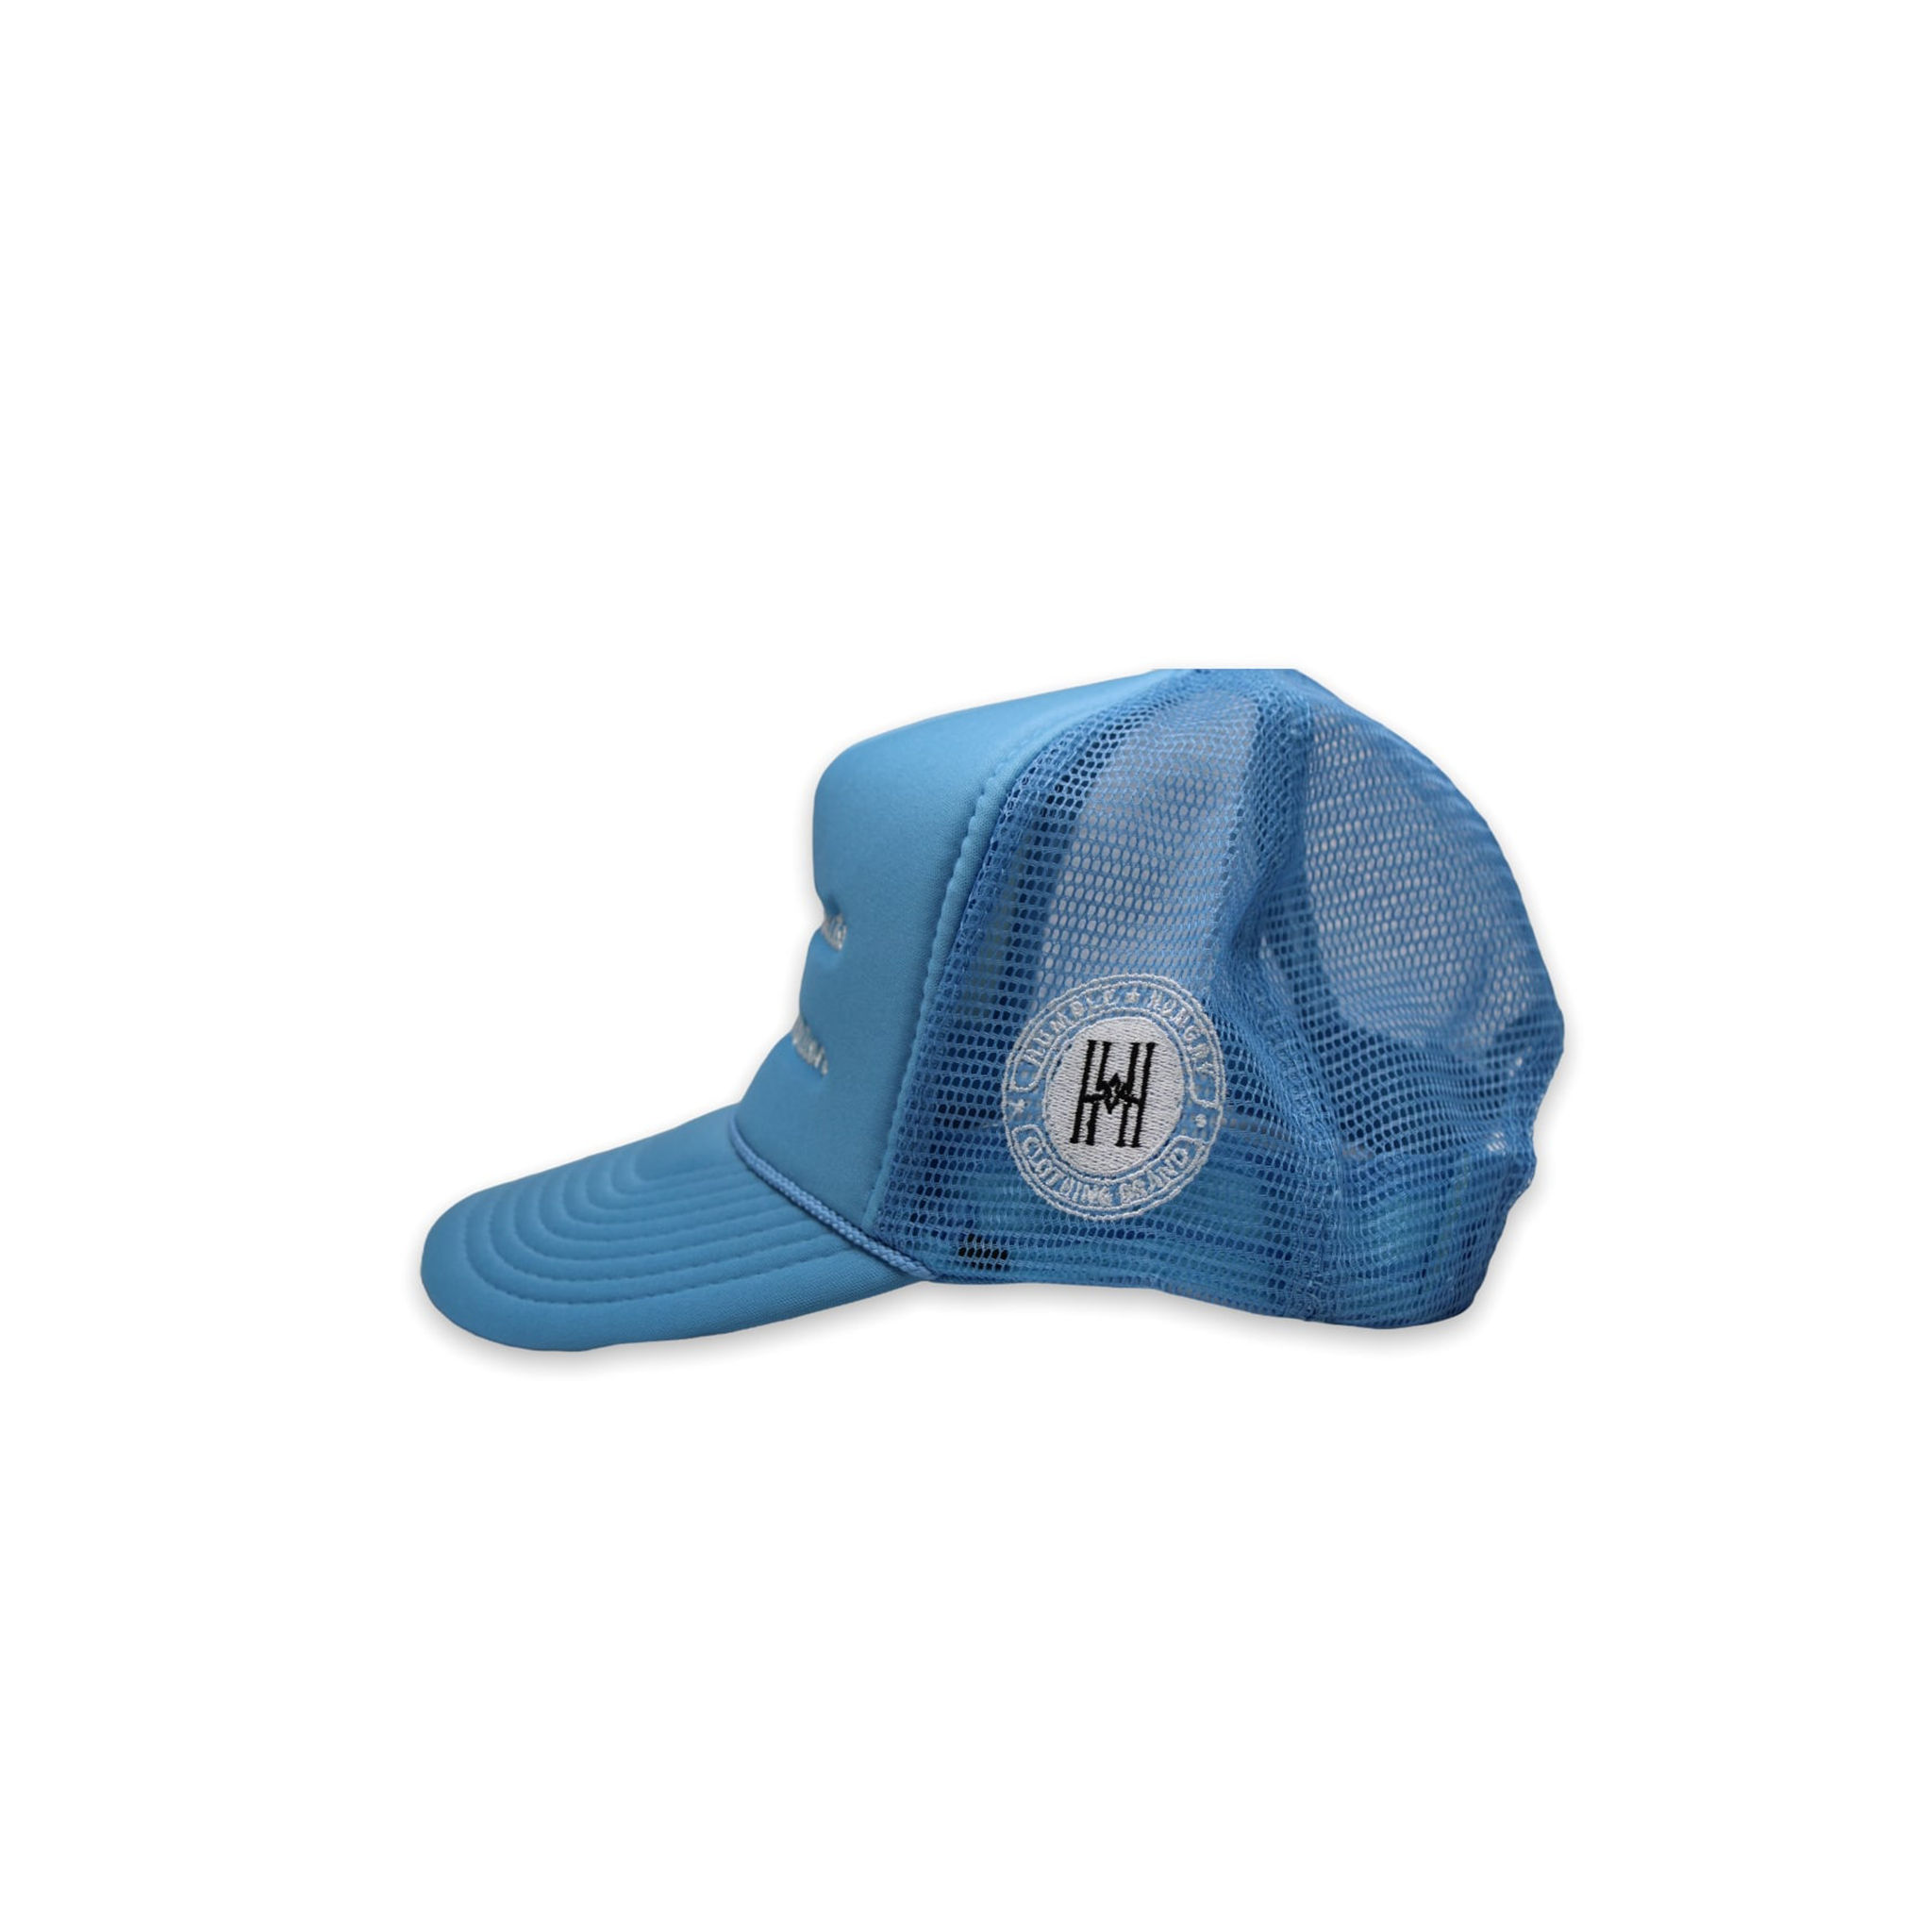 'All Ambition' Trucker Hat in Blue